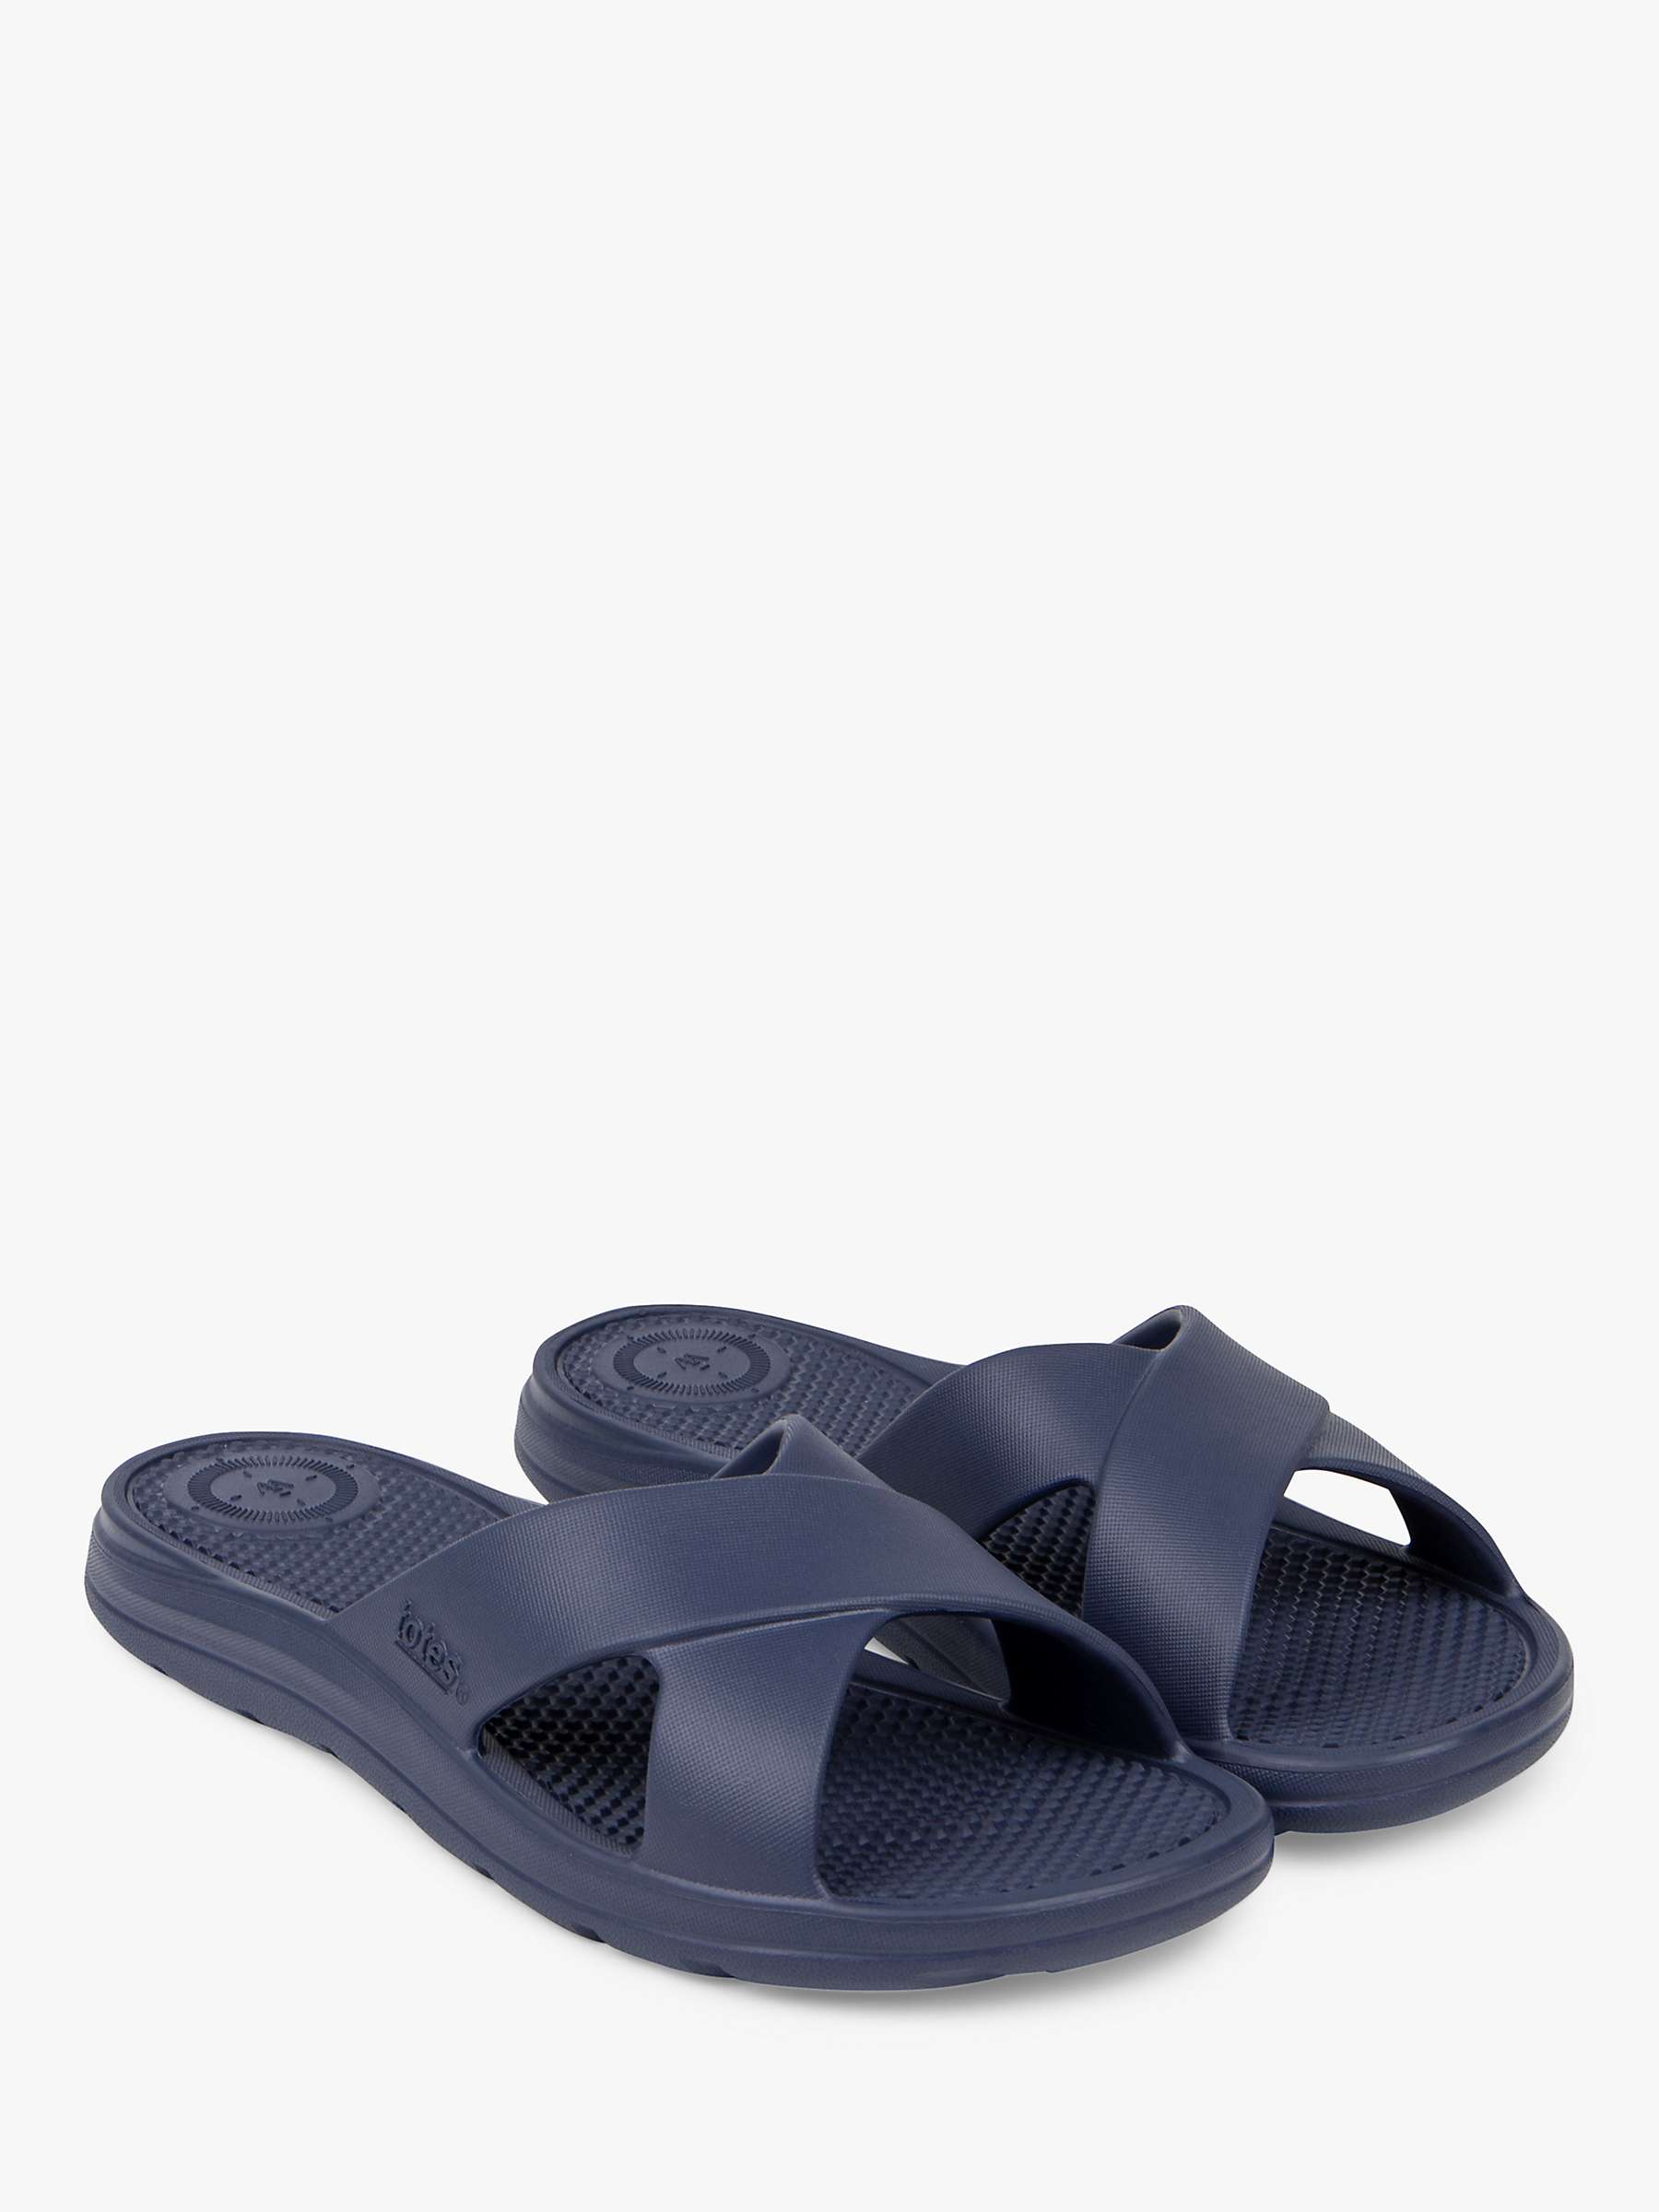 totes SOLBOUNCE Cross Strap Slider Sandals, Navy at John Lewis & Partners